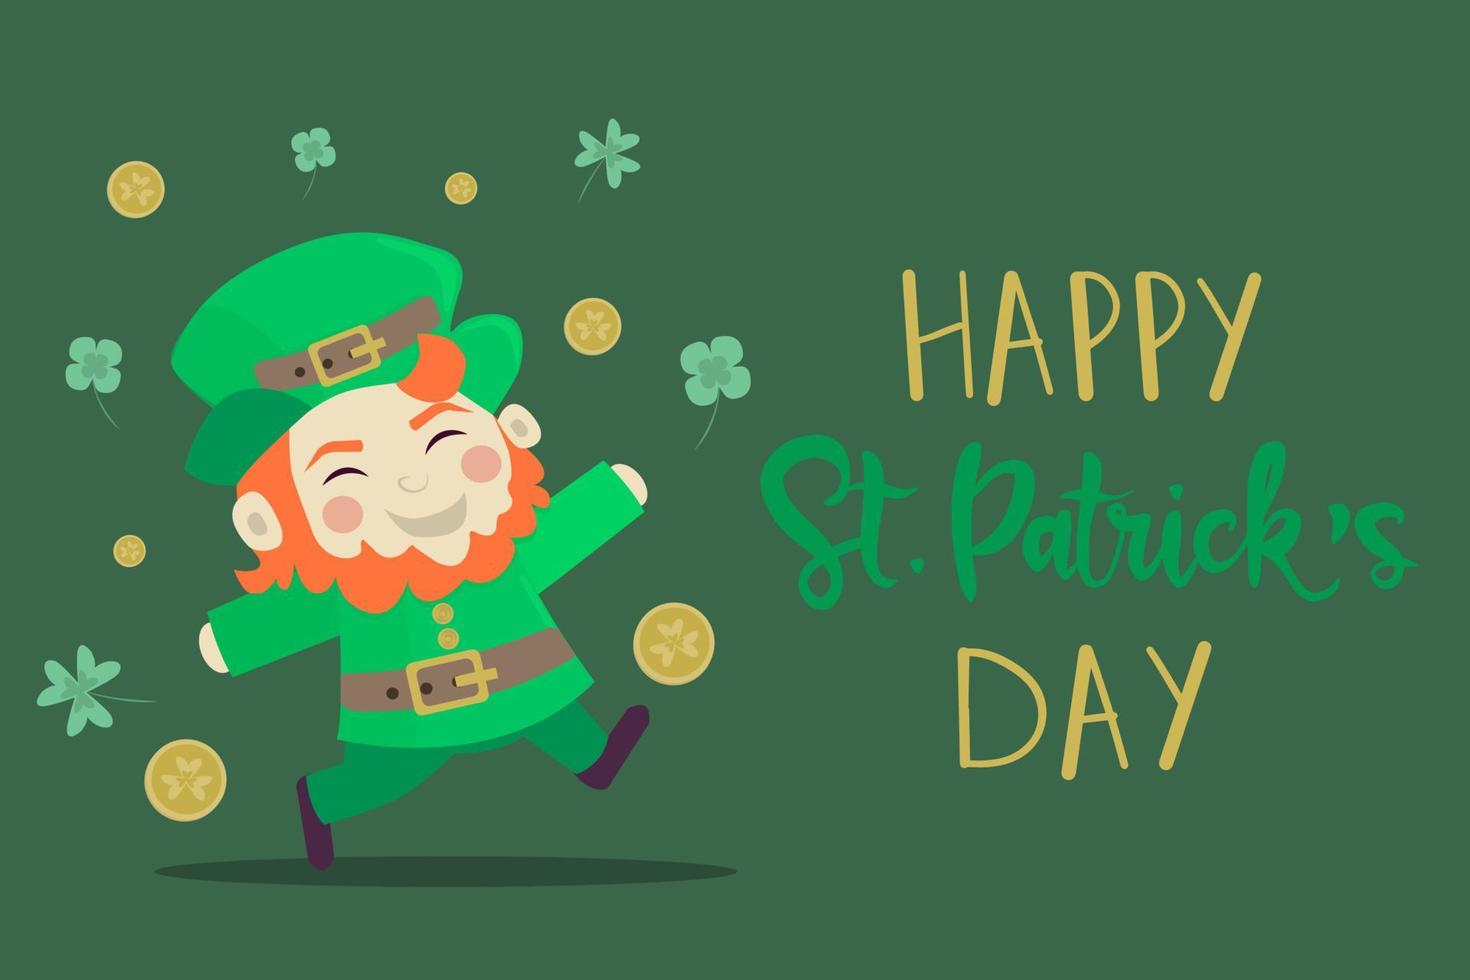 St. Patricks day greeting card. Celebration lettering with leprechaun, rainbow, lucky coins. vector